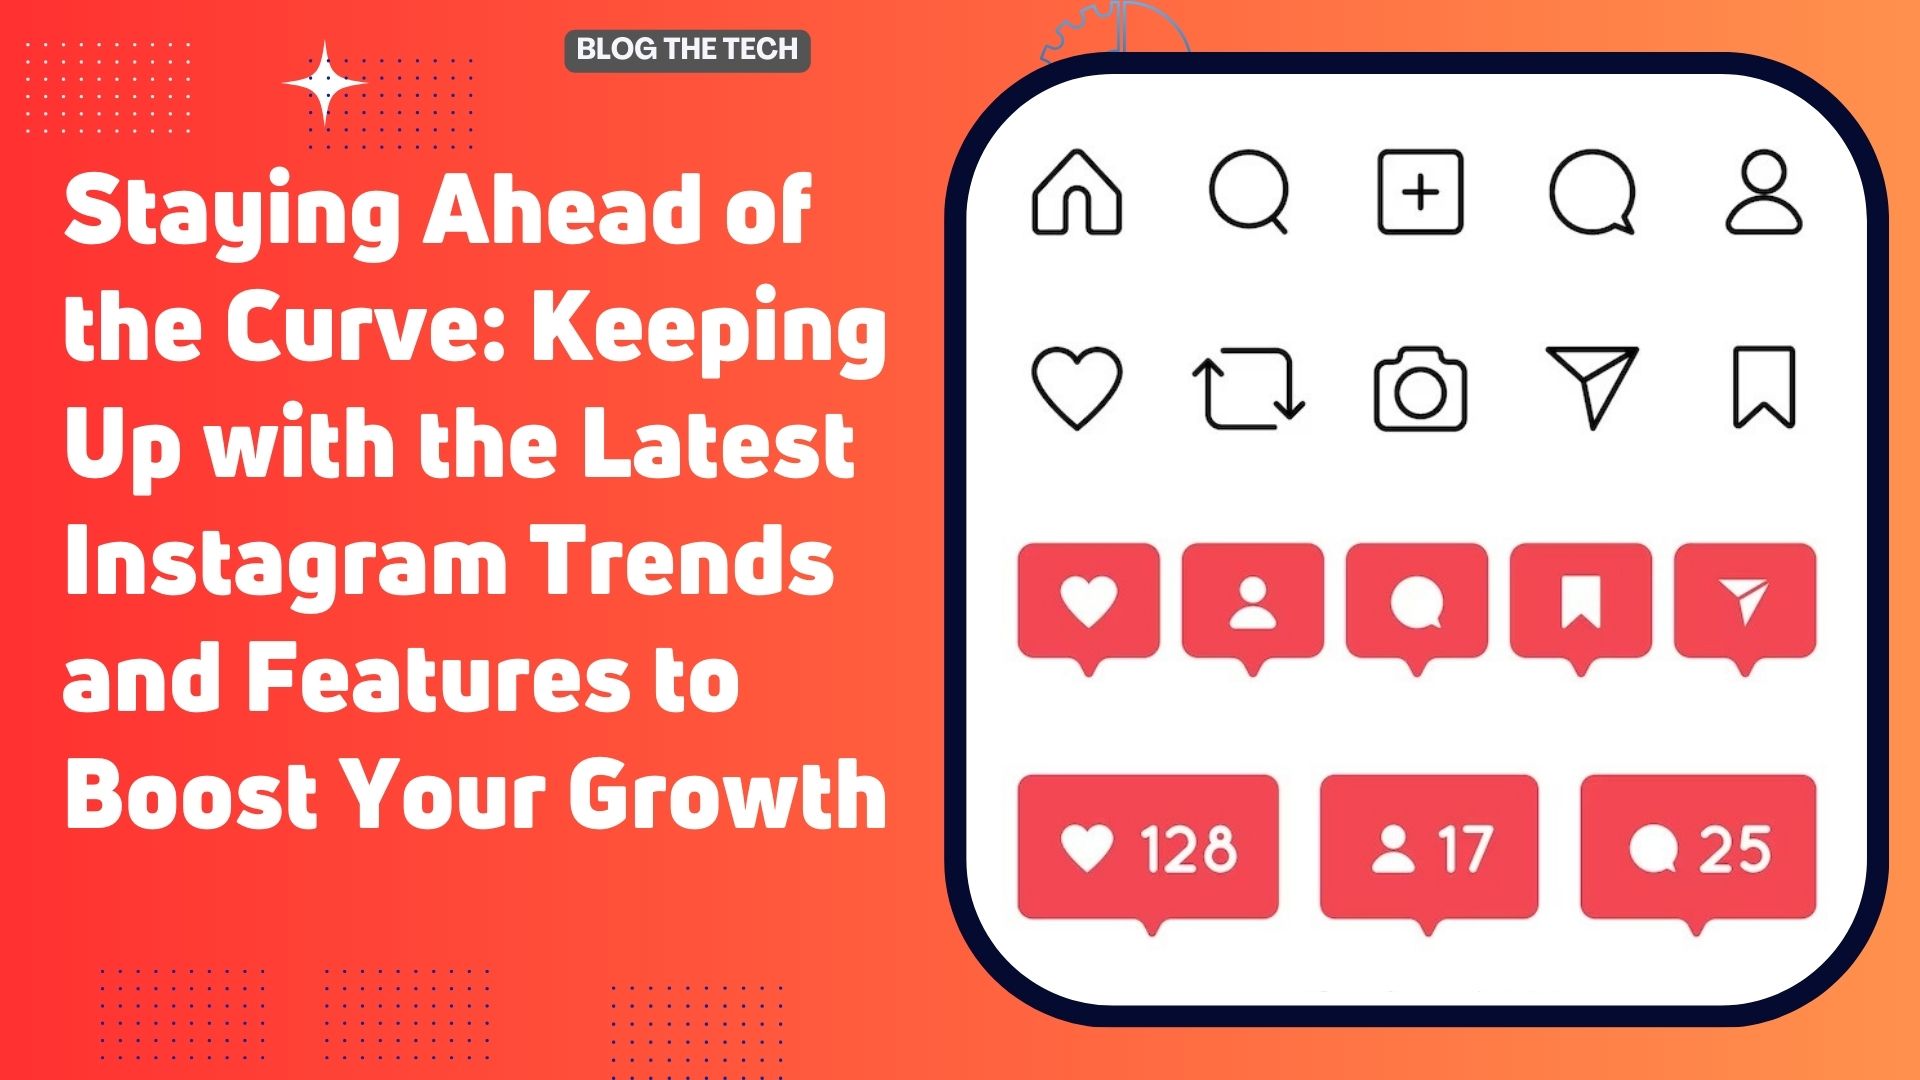 Keeping Up with the Latest Instagram Trends and Features to Boost Your Growth